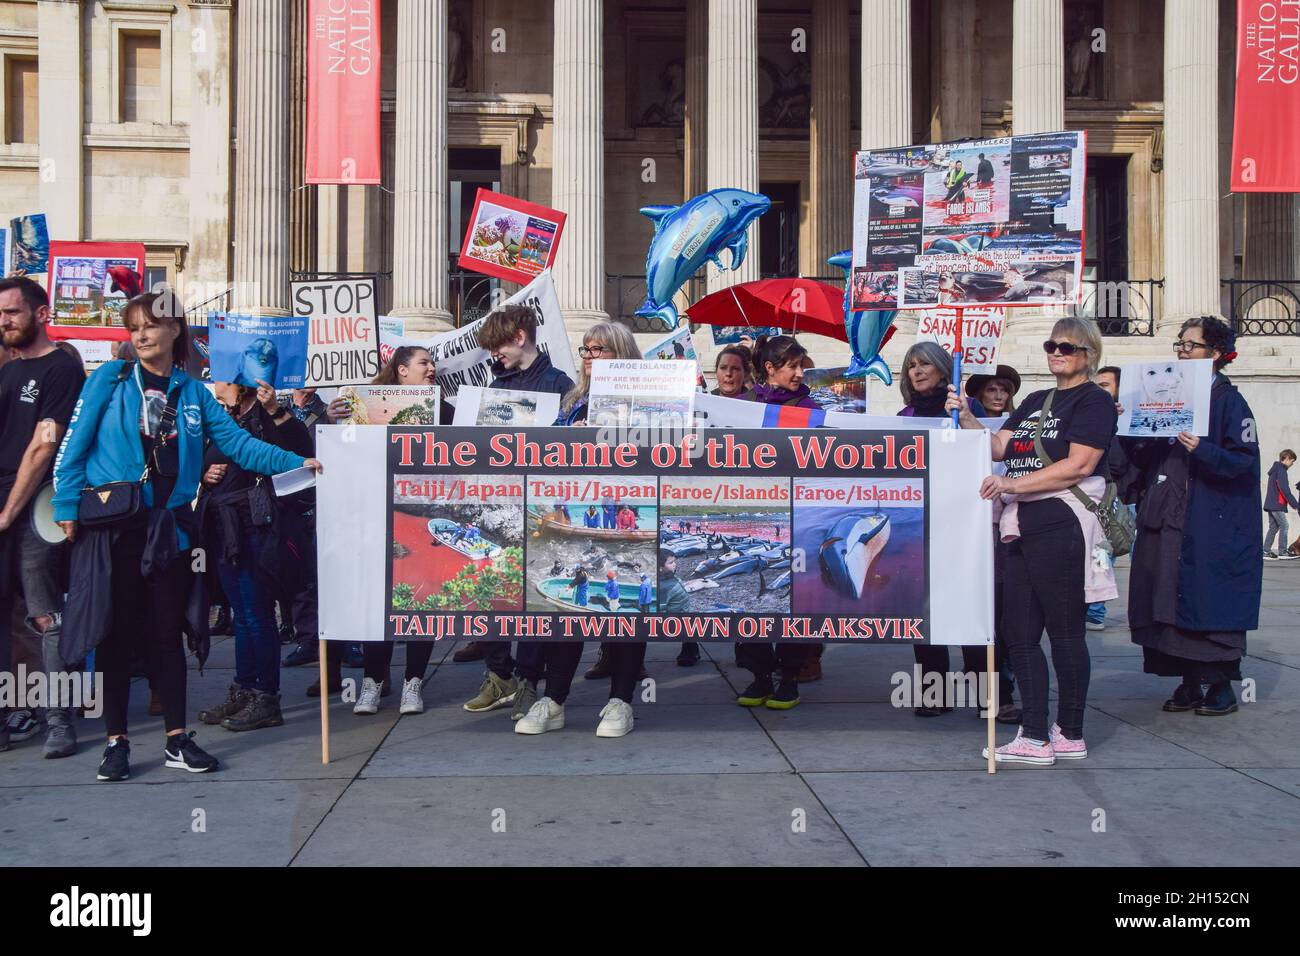 London, UK. 16th October 2021. Protesters in Trafalgar Square. Sea Shepherd and other activists marched through Westminster, calling for an end to the slaughter of dolphins in Faroe Islands and Taiji, Japan. Credit: Vuk Valcic / Alamy Live News Stock Photo